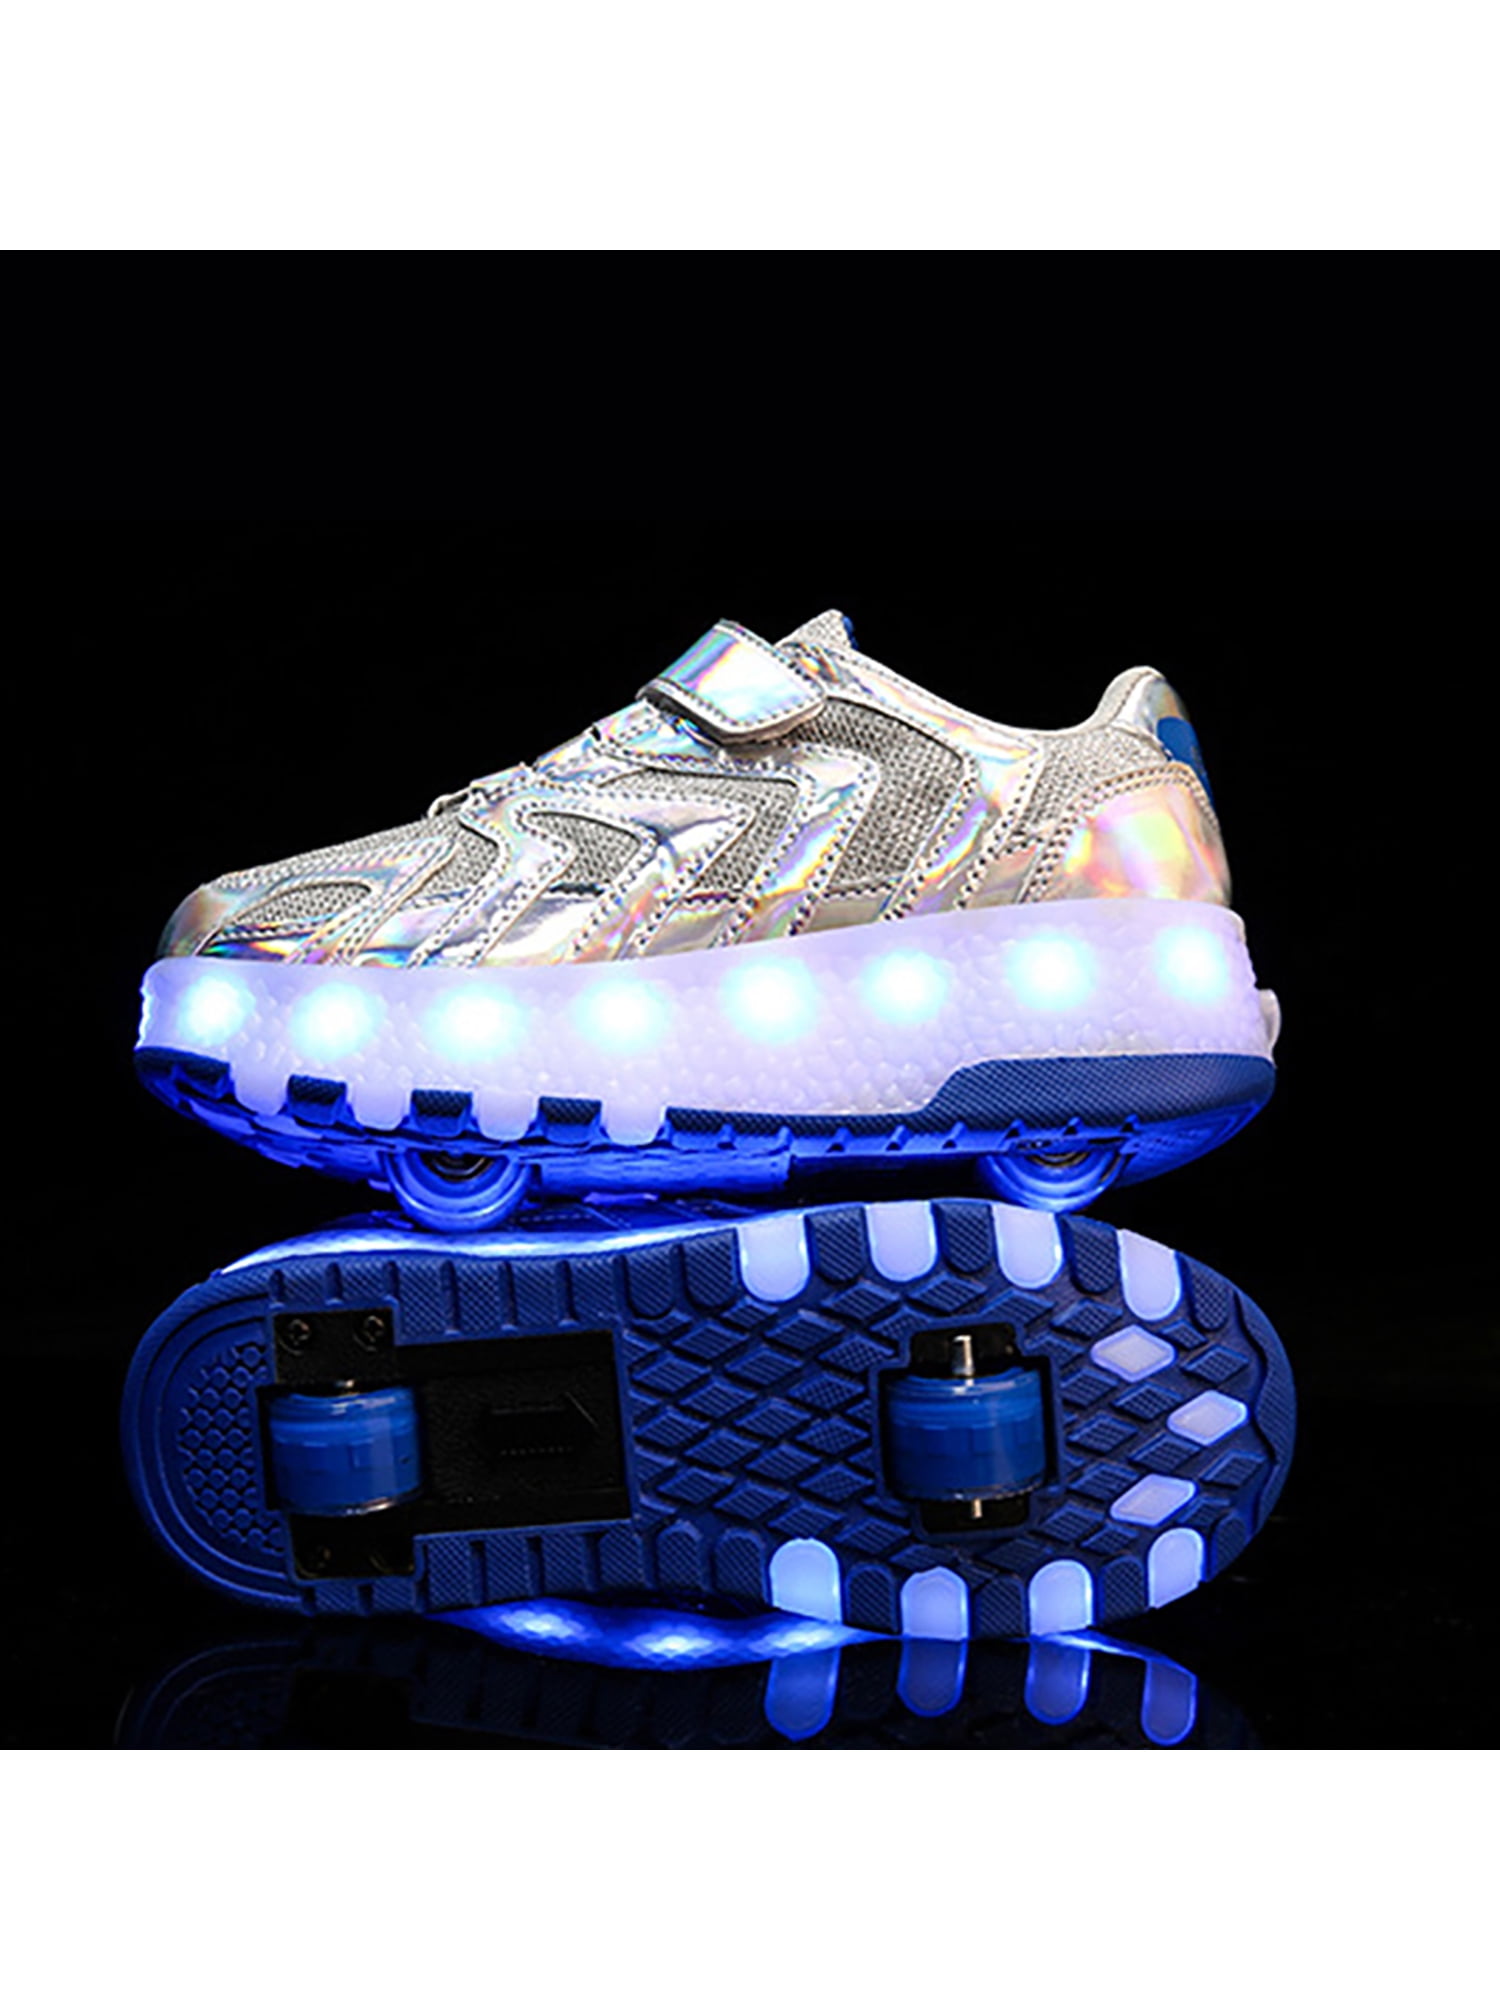 Led Light Up Shoes for Kids Boys Girls Childrens Mesh Breathable Outdoor Sport Fashion Luminous Sneakers 